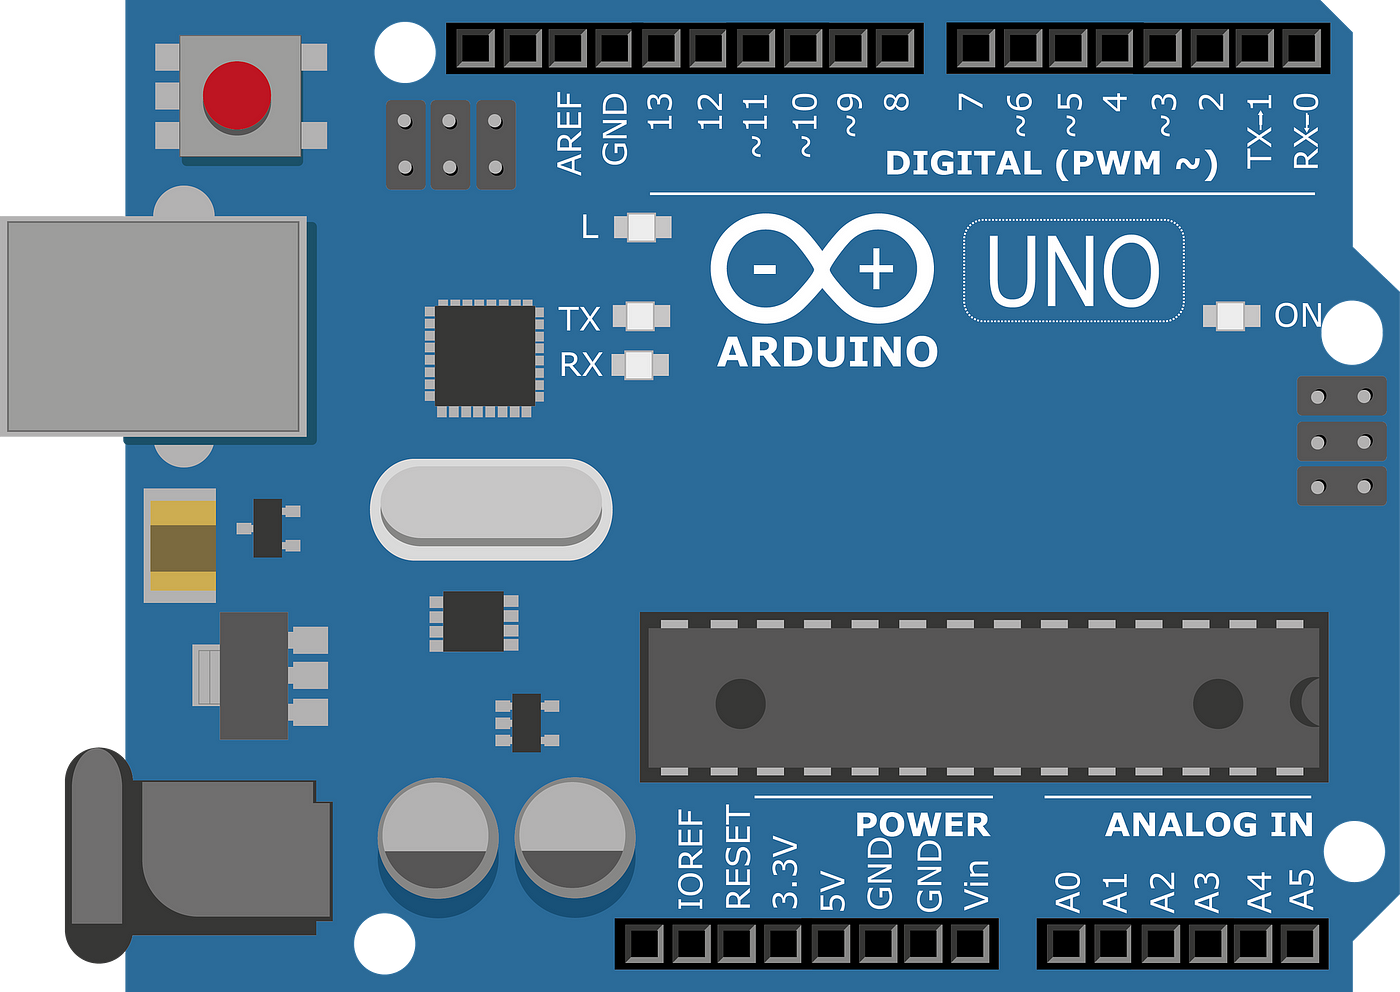 Powering the Arduino Uno without a USB Cable 